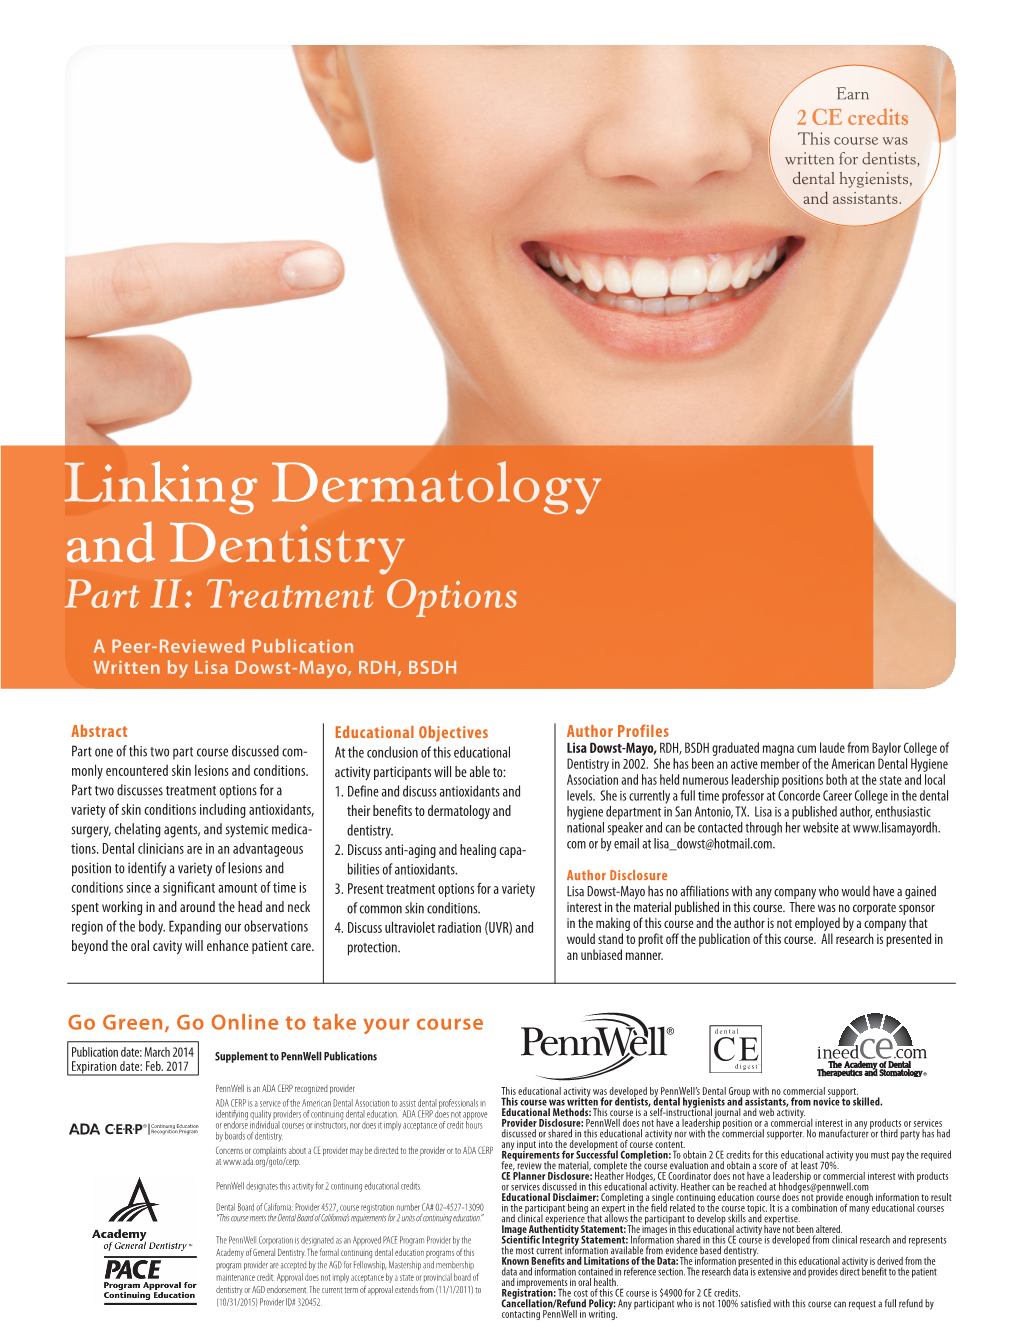 Linking Dermatology and Dentistry Part II: Treatment Options a Peer-Reviewed Publication Written by Lisa Dowst-Mayo, RDH, BSDH